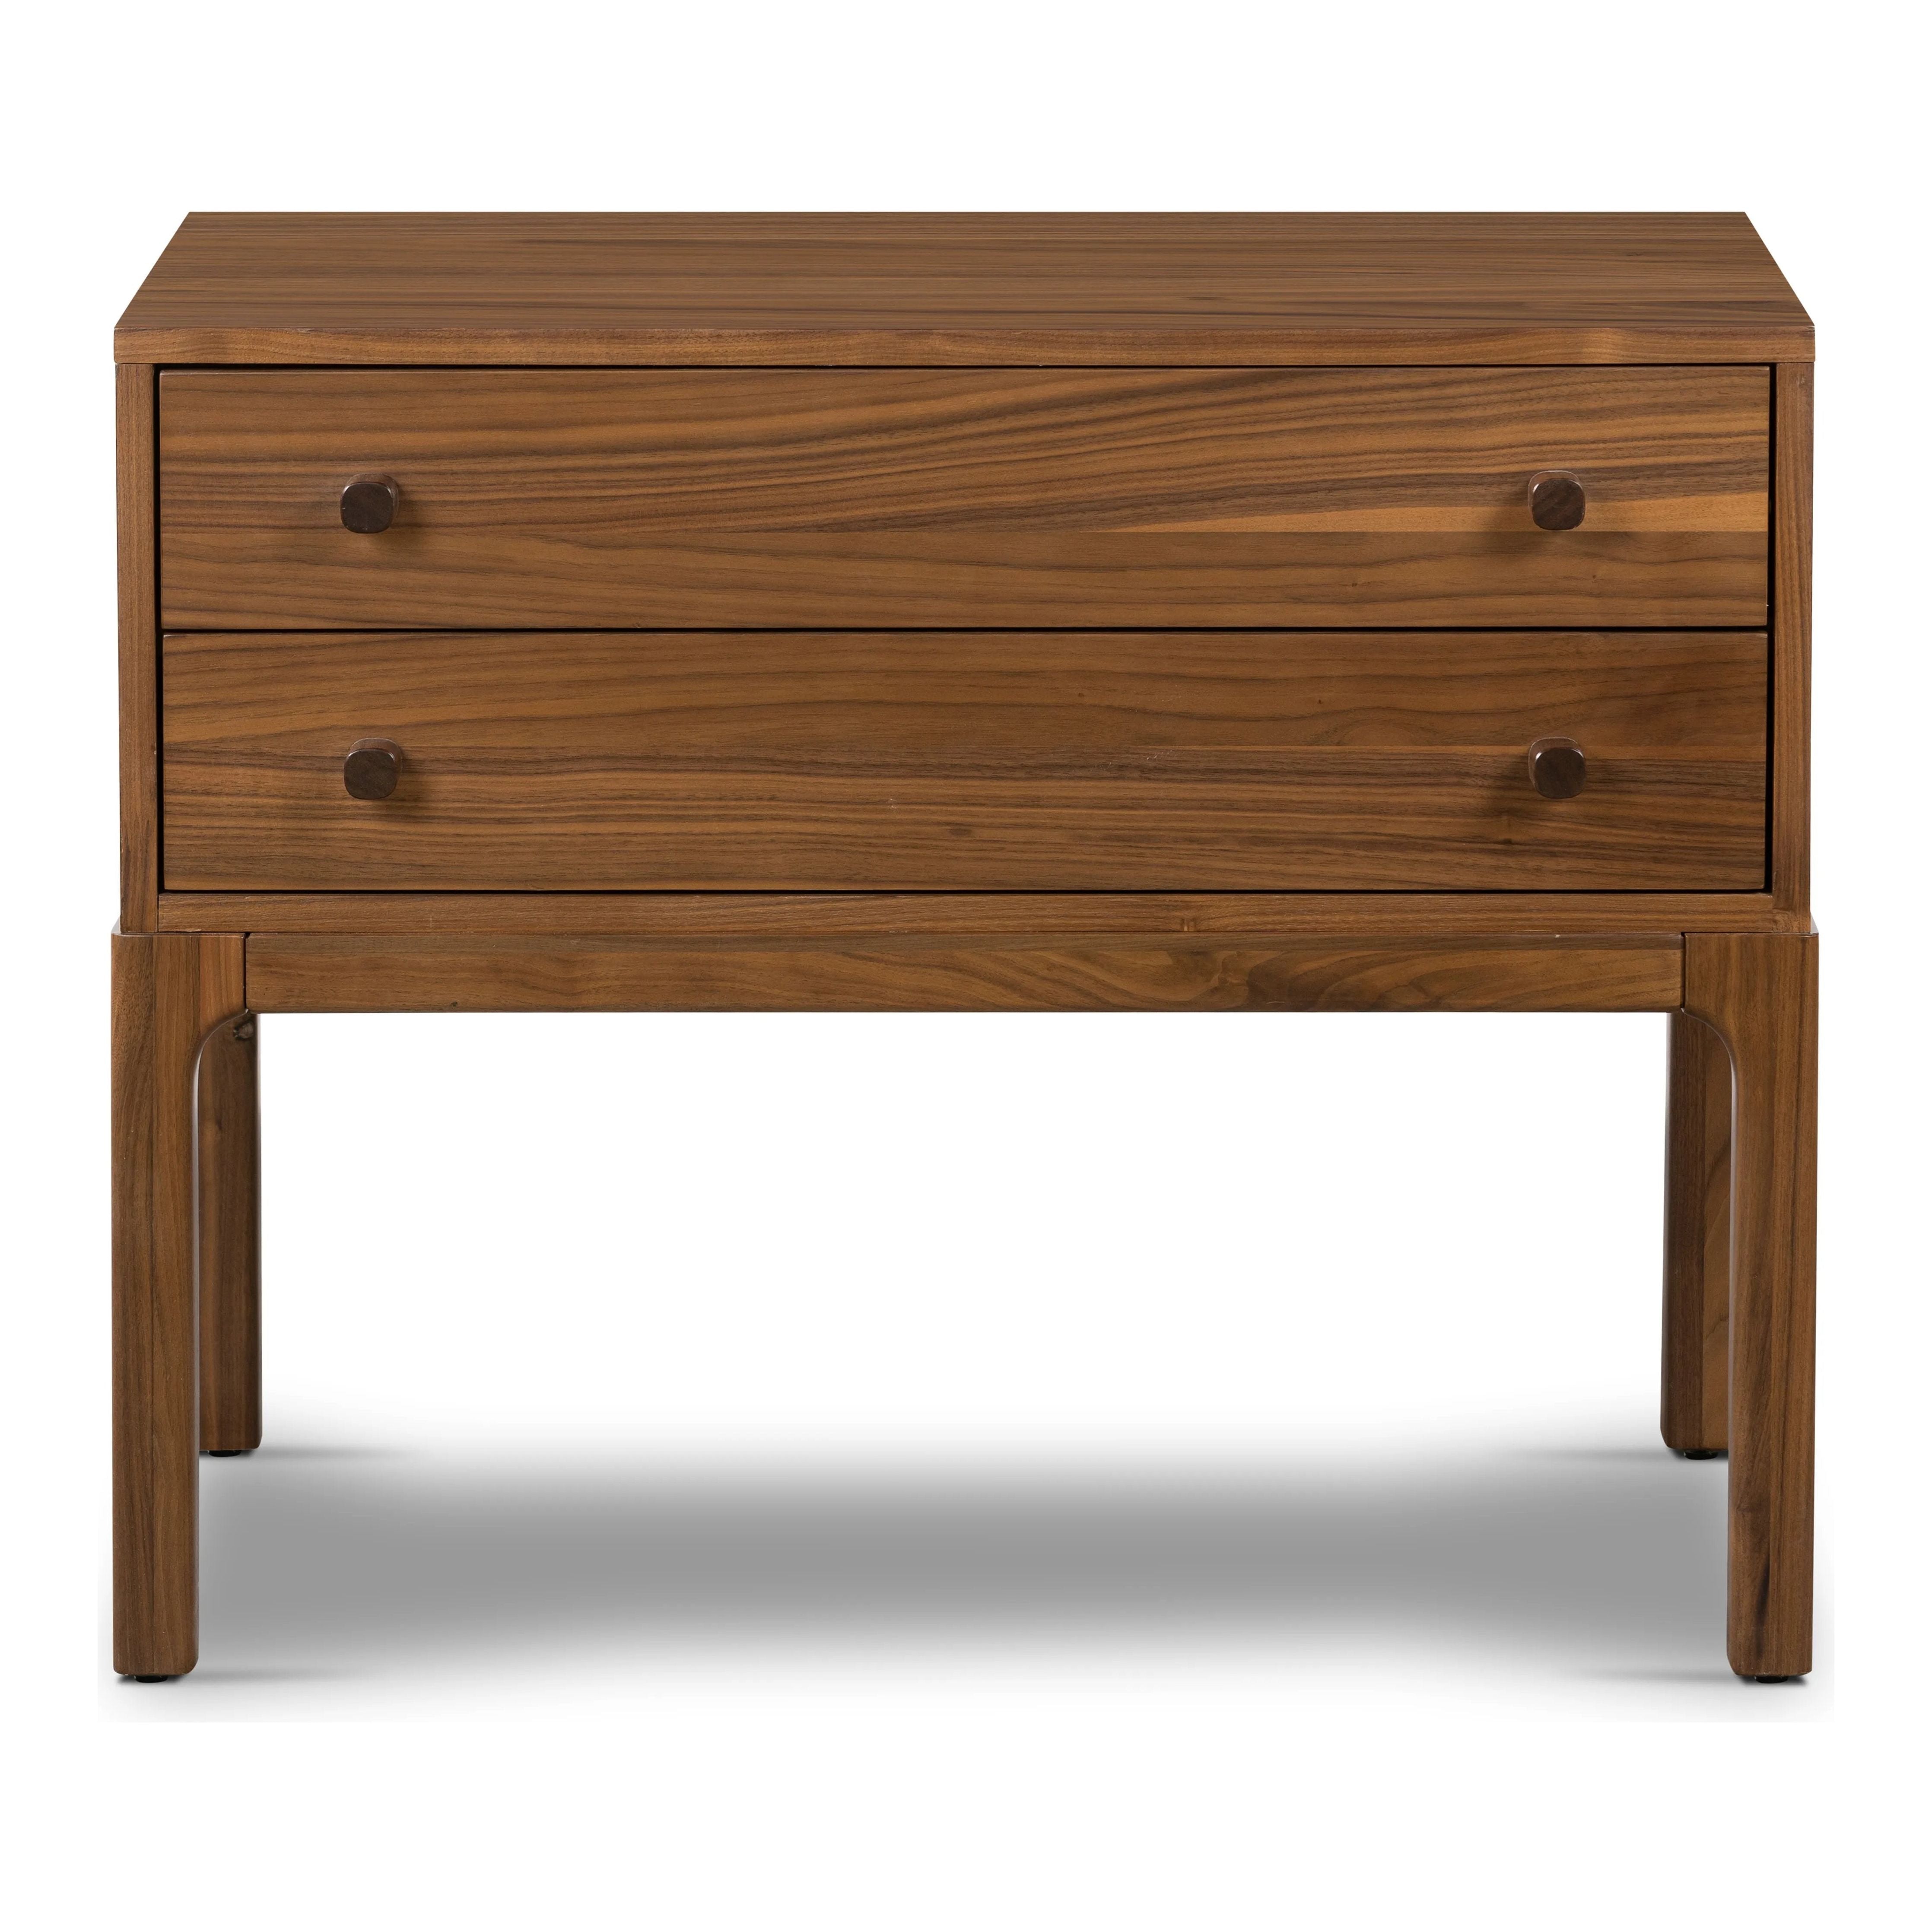 Inspired by campaign-style furniture of the 1800s â€” packable pieces first designed for traveling military use â€” a simply shaped nightstand of natural walnut features a subtly inset top and rounded legs, finished with wooden hardware Amethyst Home provides interior design, new home construction design consulting, vintage area rugs, and lighting in the Seattle metro area.